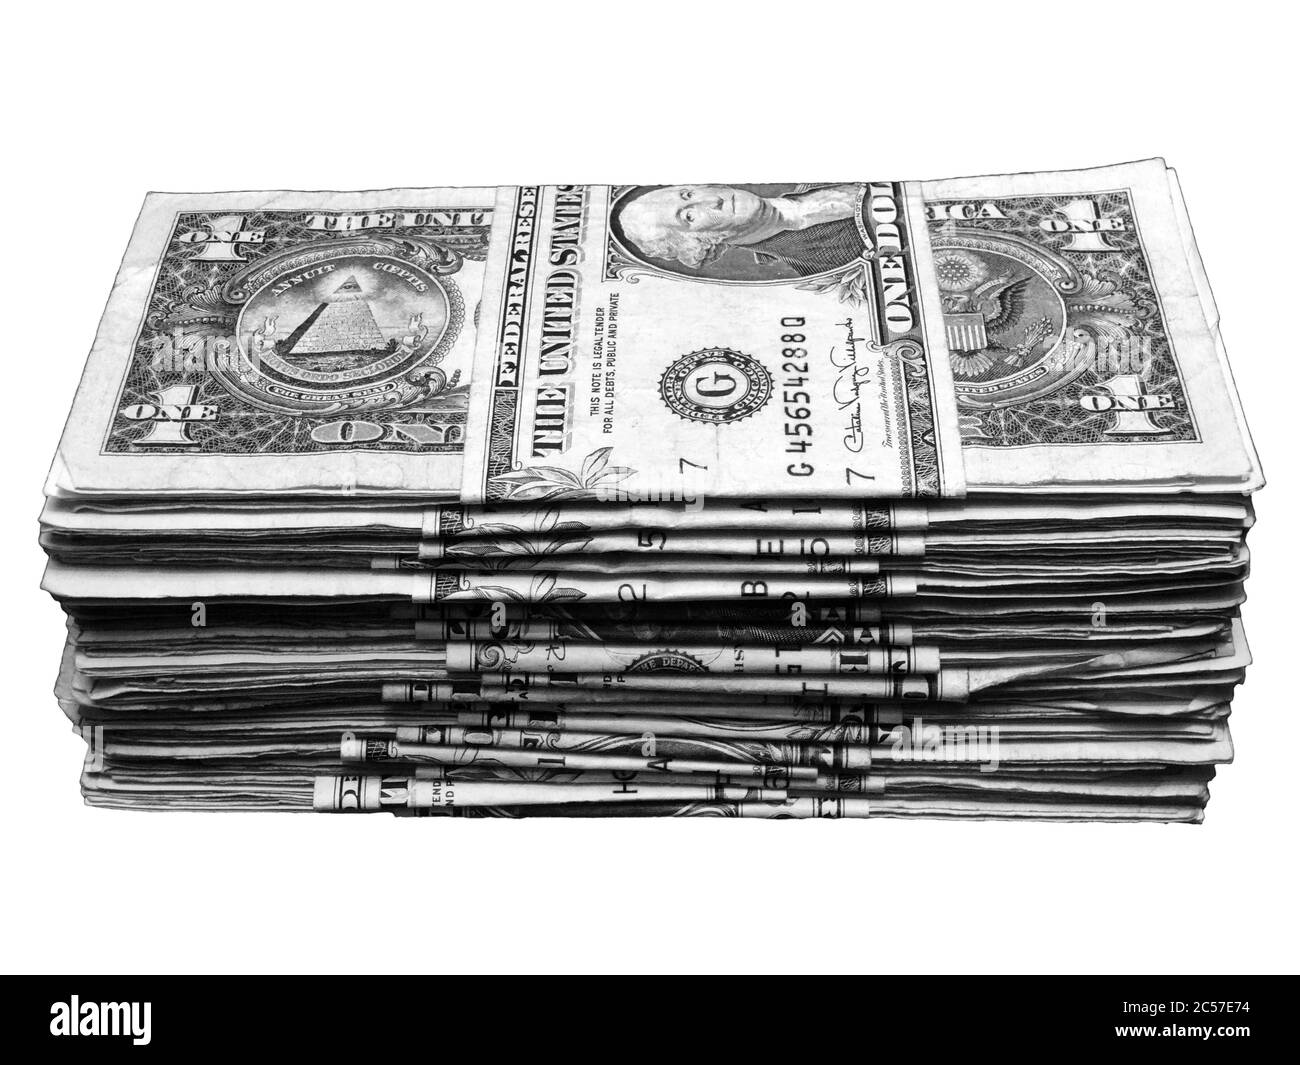 USA one dollar bill bank notes cut out and isolated on a white background black & white monochrome image Stock Photo